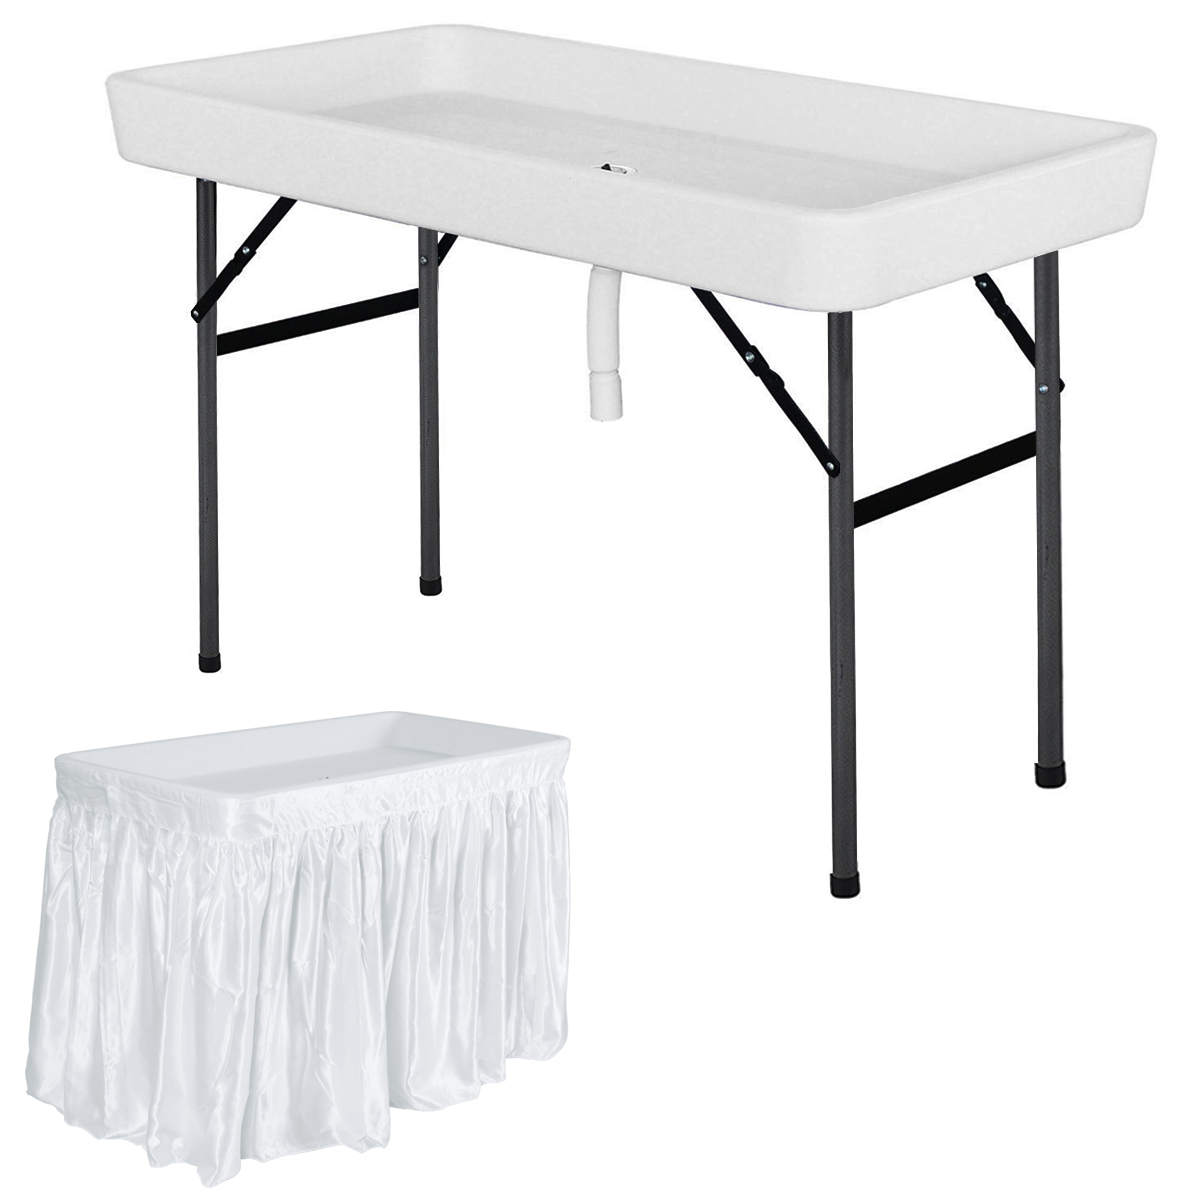 Costway 4 Foot Party Ice Folding Table Plastic with Matching Skirt White